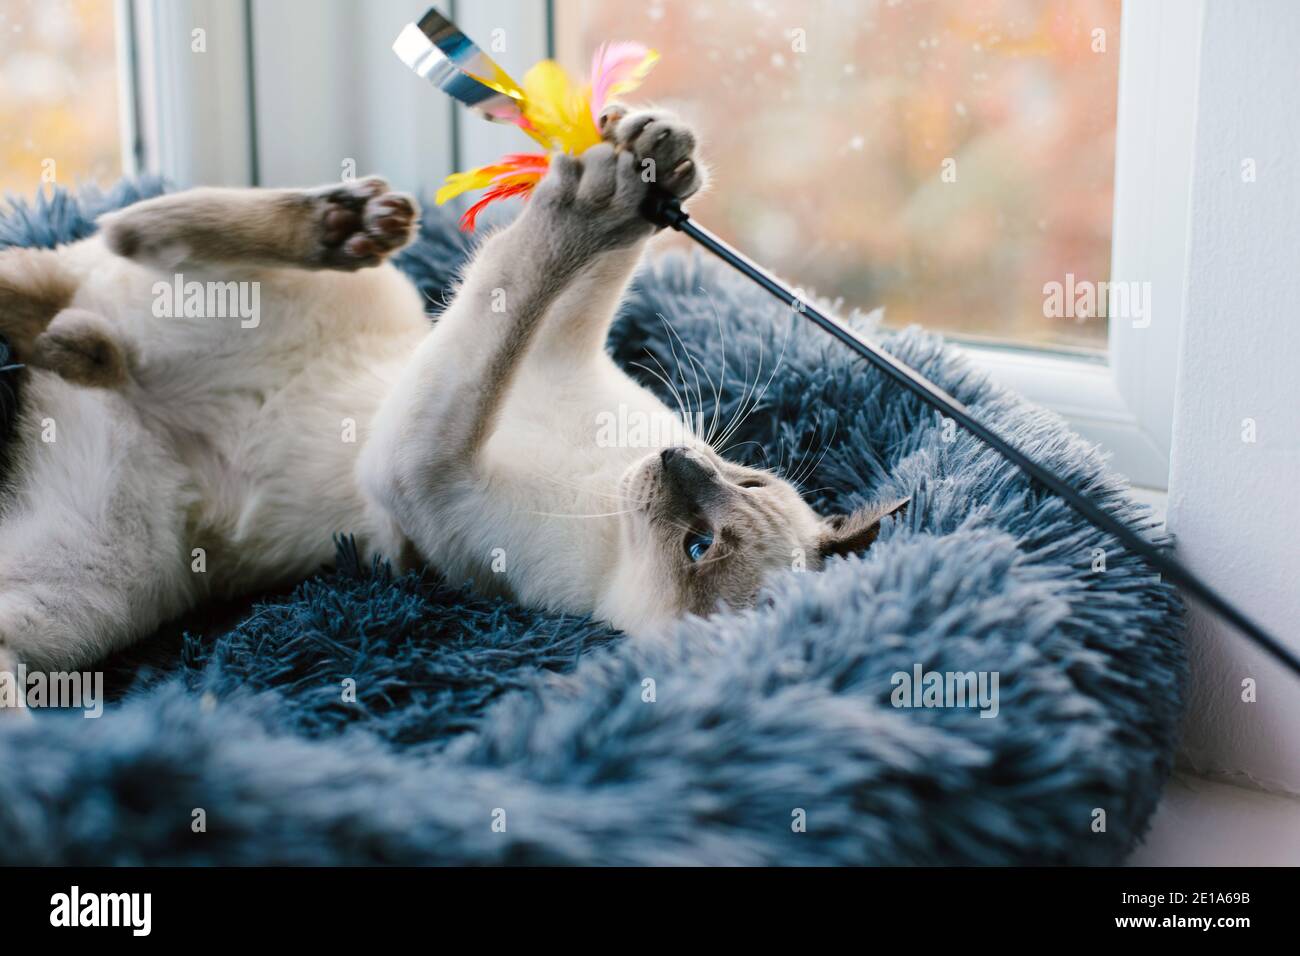 A 6-month old Lilac Point Siamese kitten playing with a cat toy in the window of a house Stock Photo